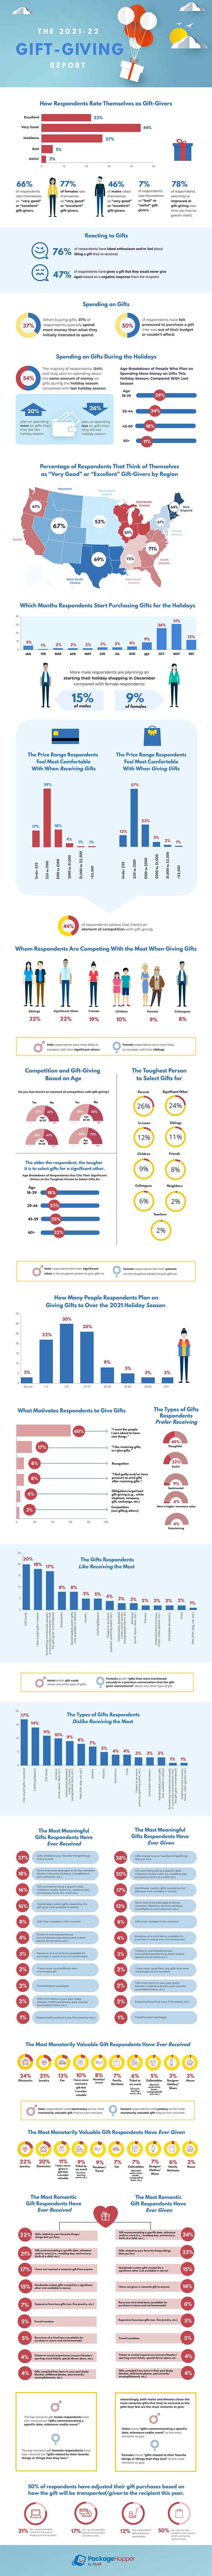 2021-2022 Gift Giving Report Infographic